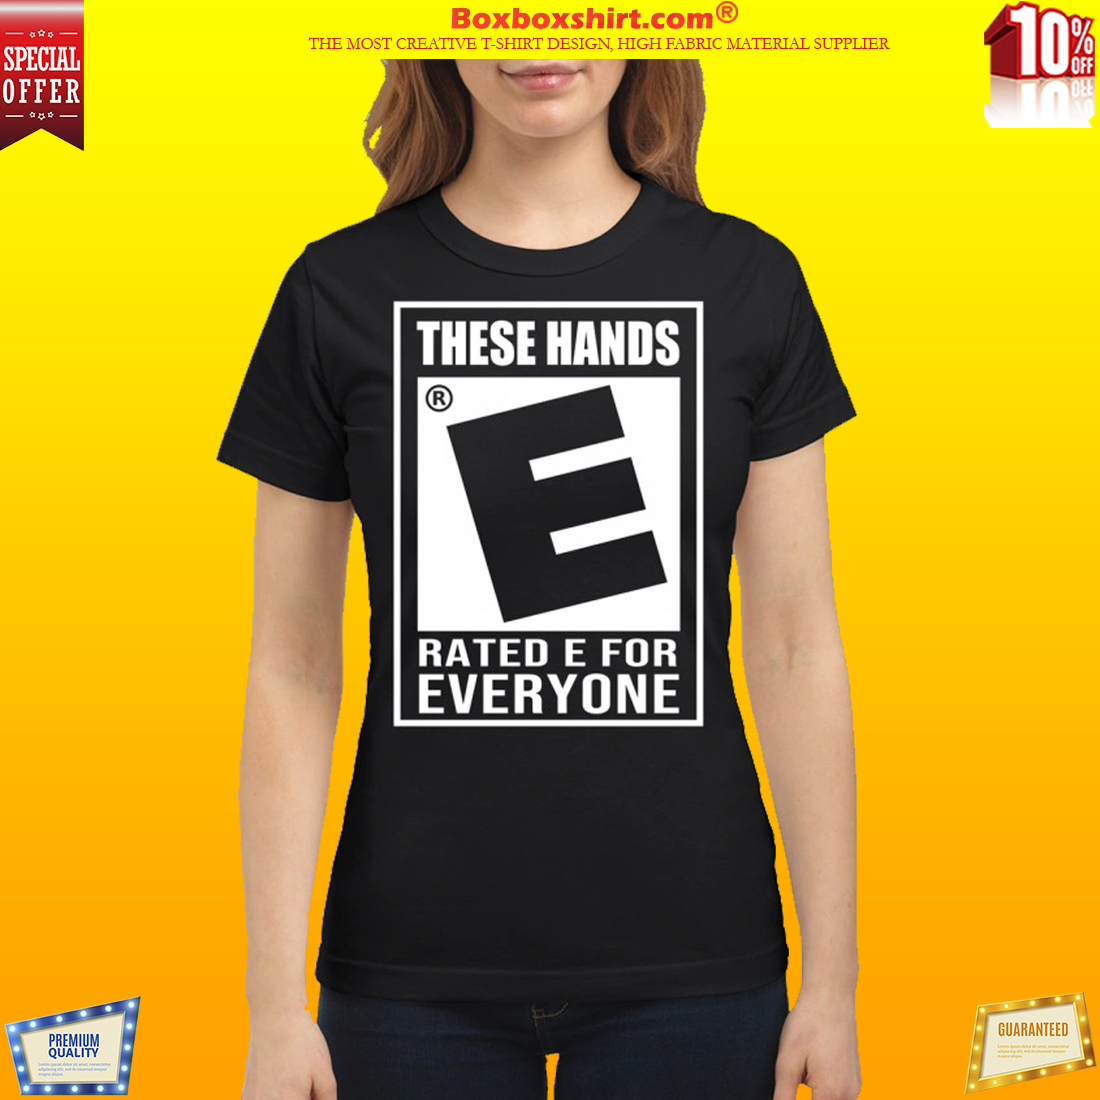 These hand raise E for everyone classic shirt